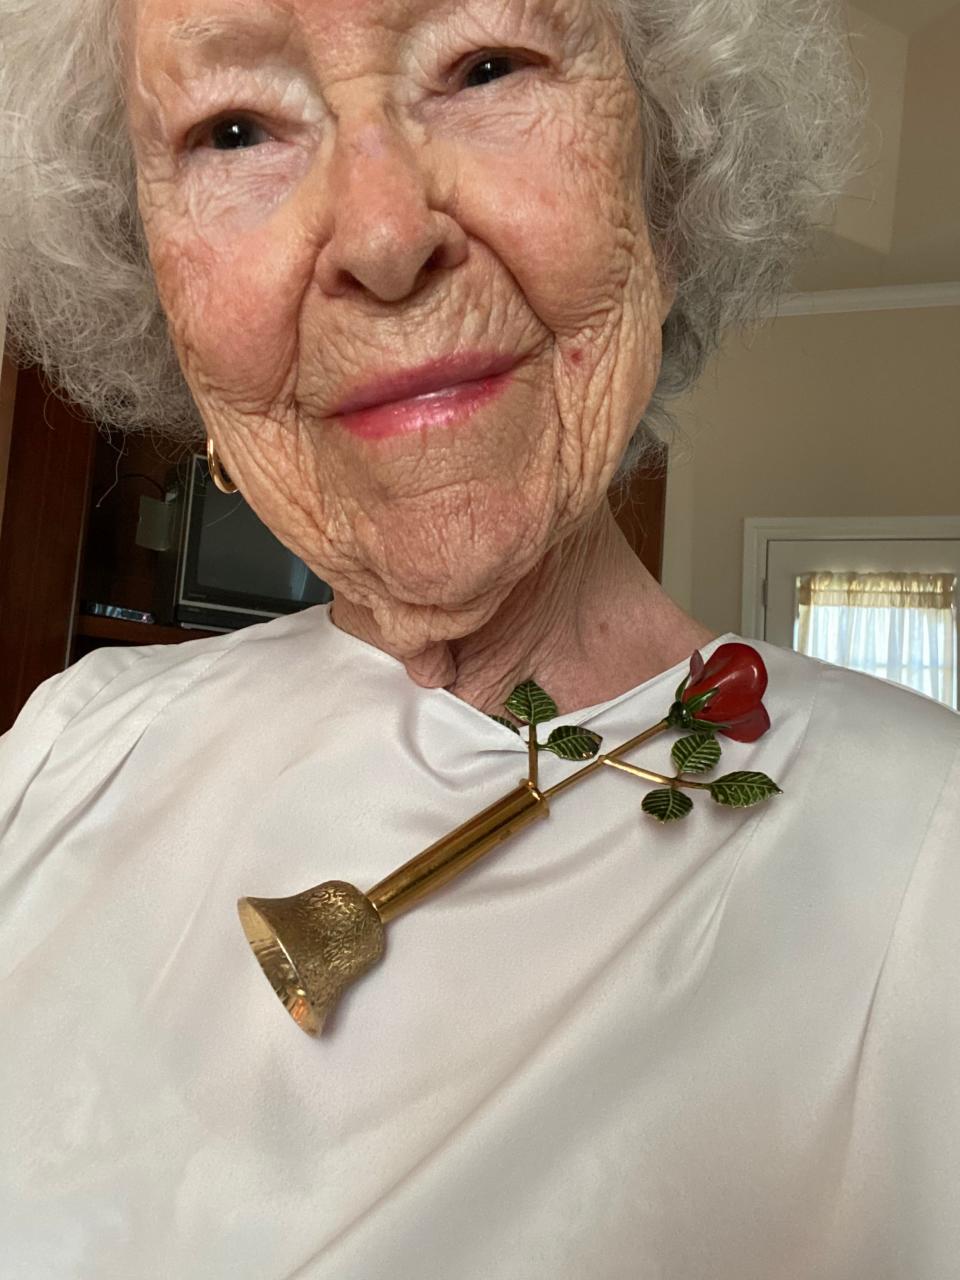 Mary Lea Forsythe, an Oklahoma woman who was born on a leap day on Feb. 29, 1924. She turns 100 on Feb. 29, 2024 but due to her birthday falling on a leap day, she has only had 25 birthdays in her lifetime so far.